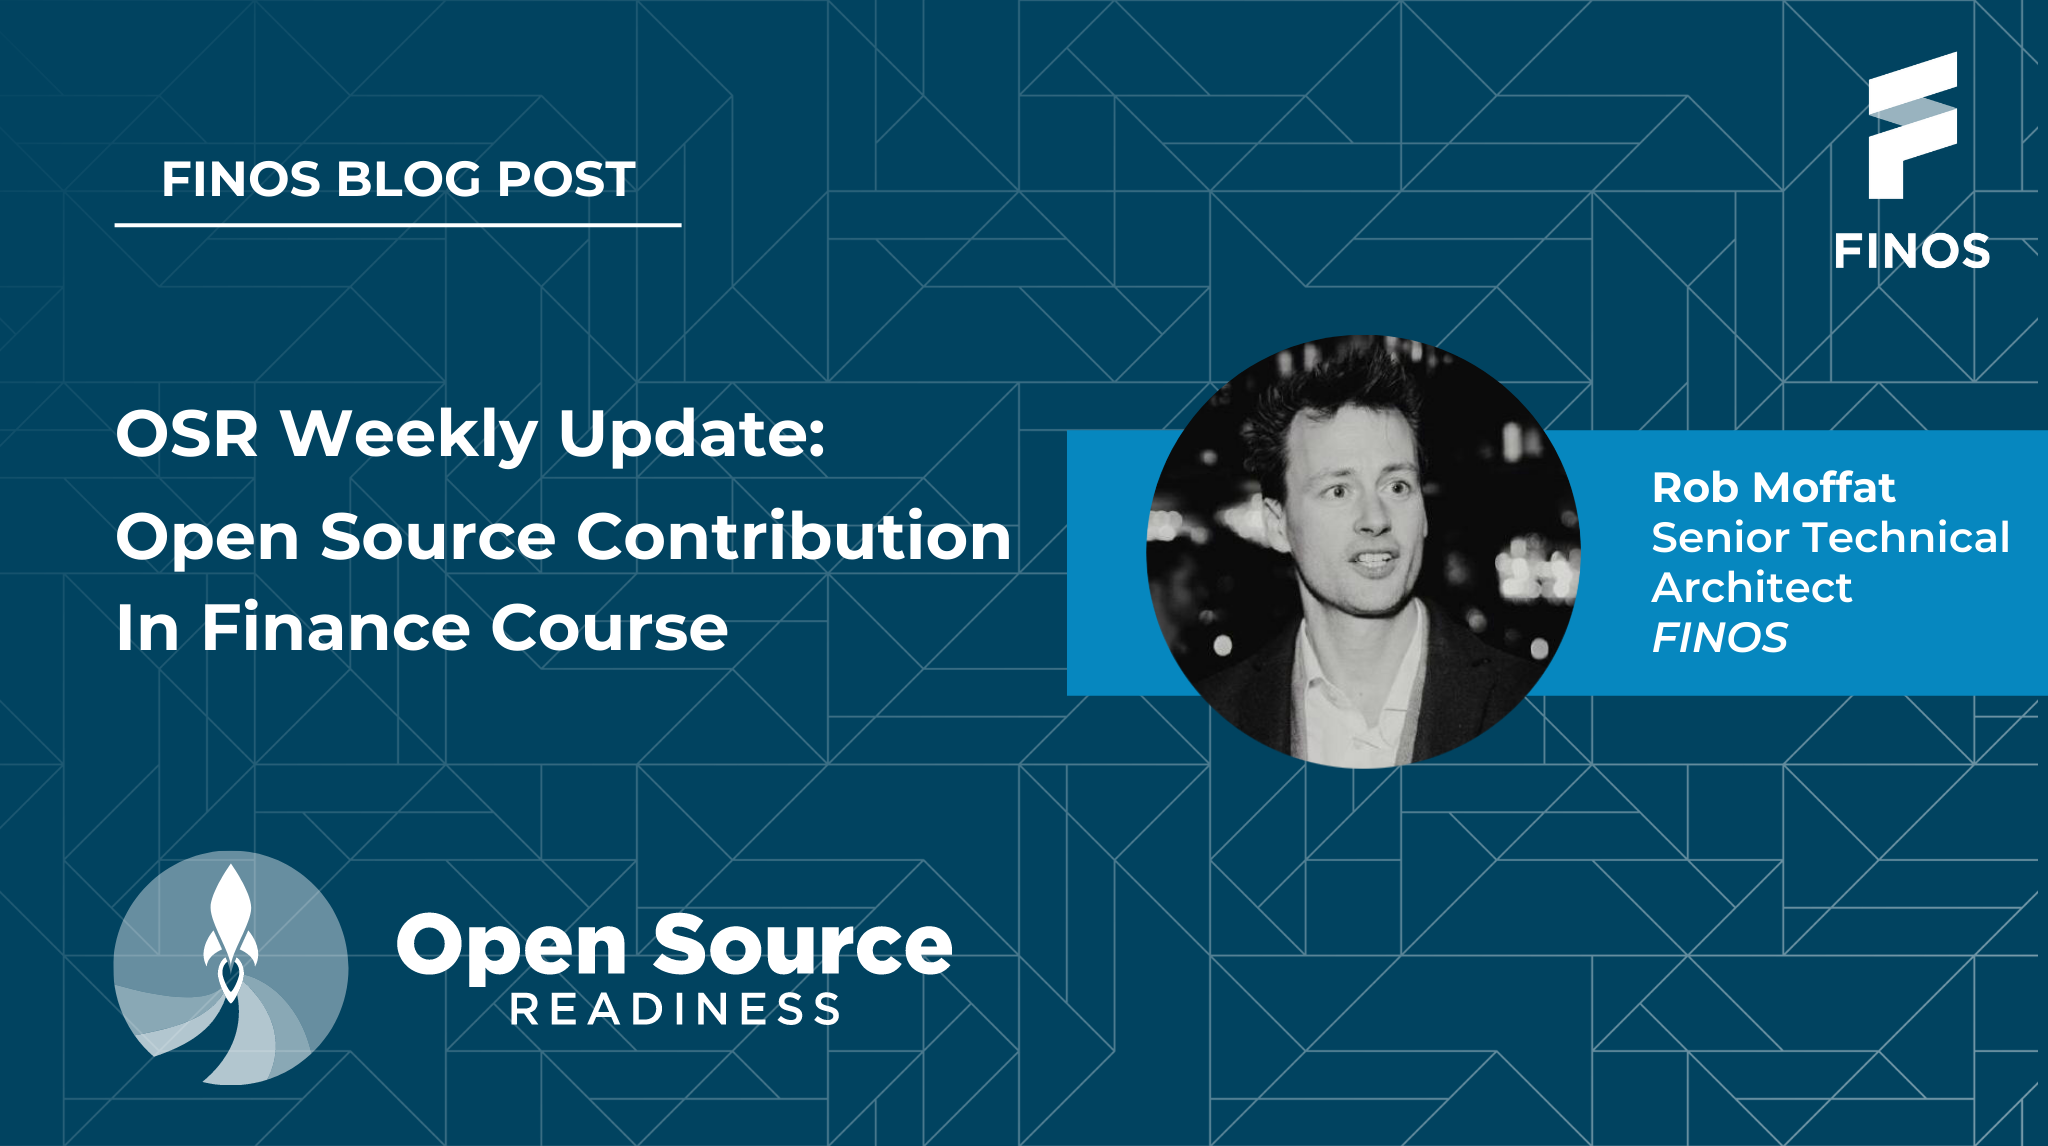 Open Source Contribution in Finance Course - Rob Moffat